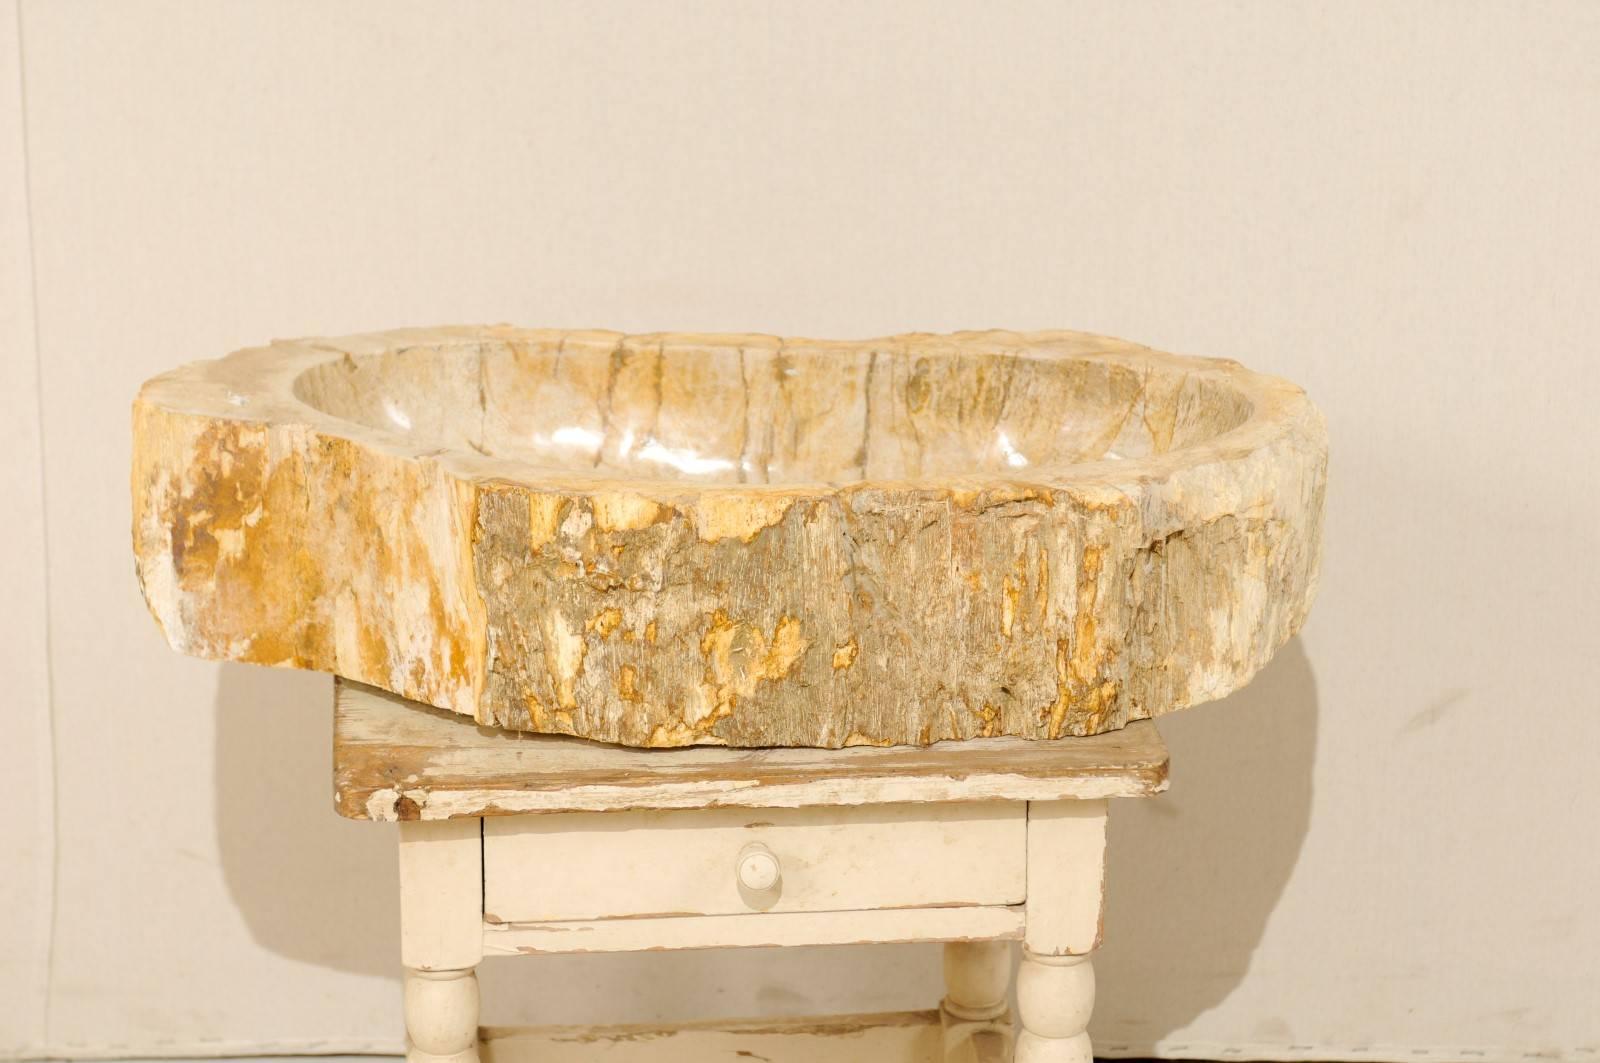 Polished Petrified Wood Sink with Rustic Oblong Shape in Warm Cream & Beige 1